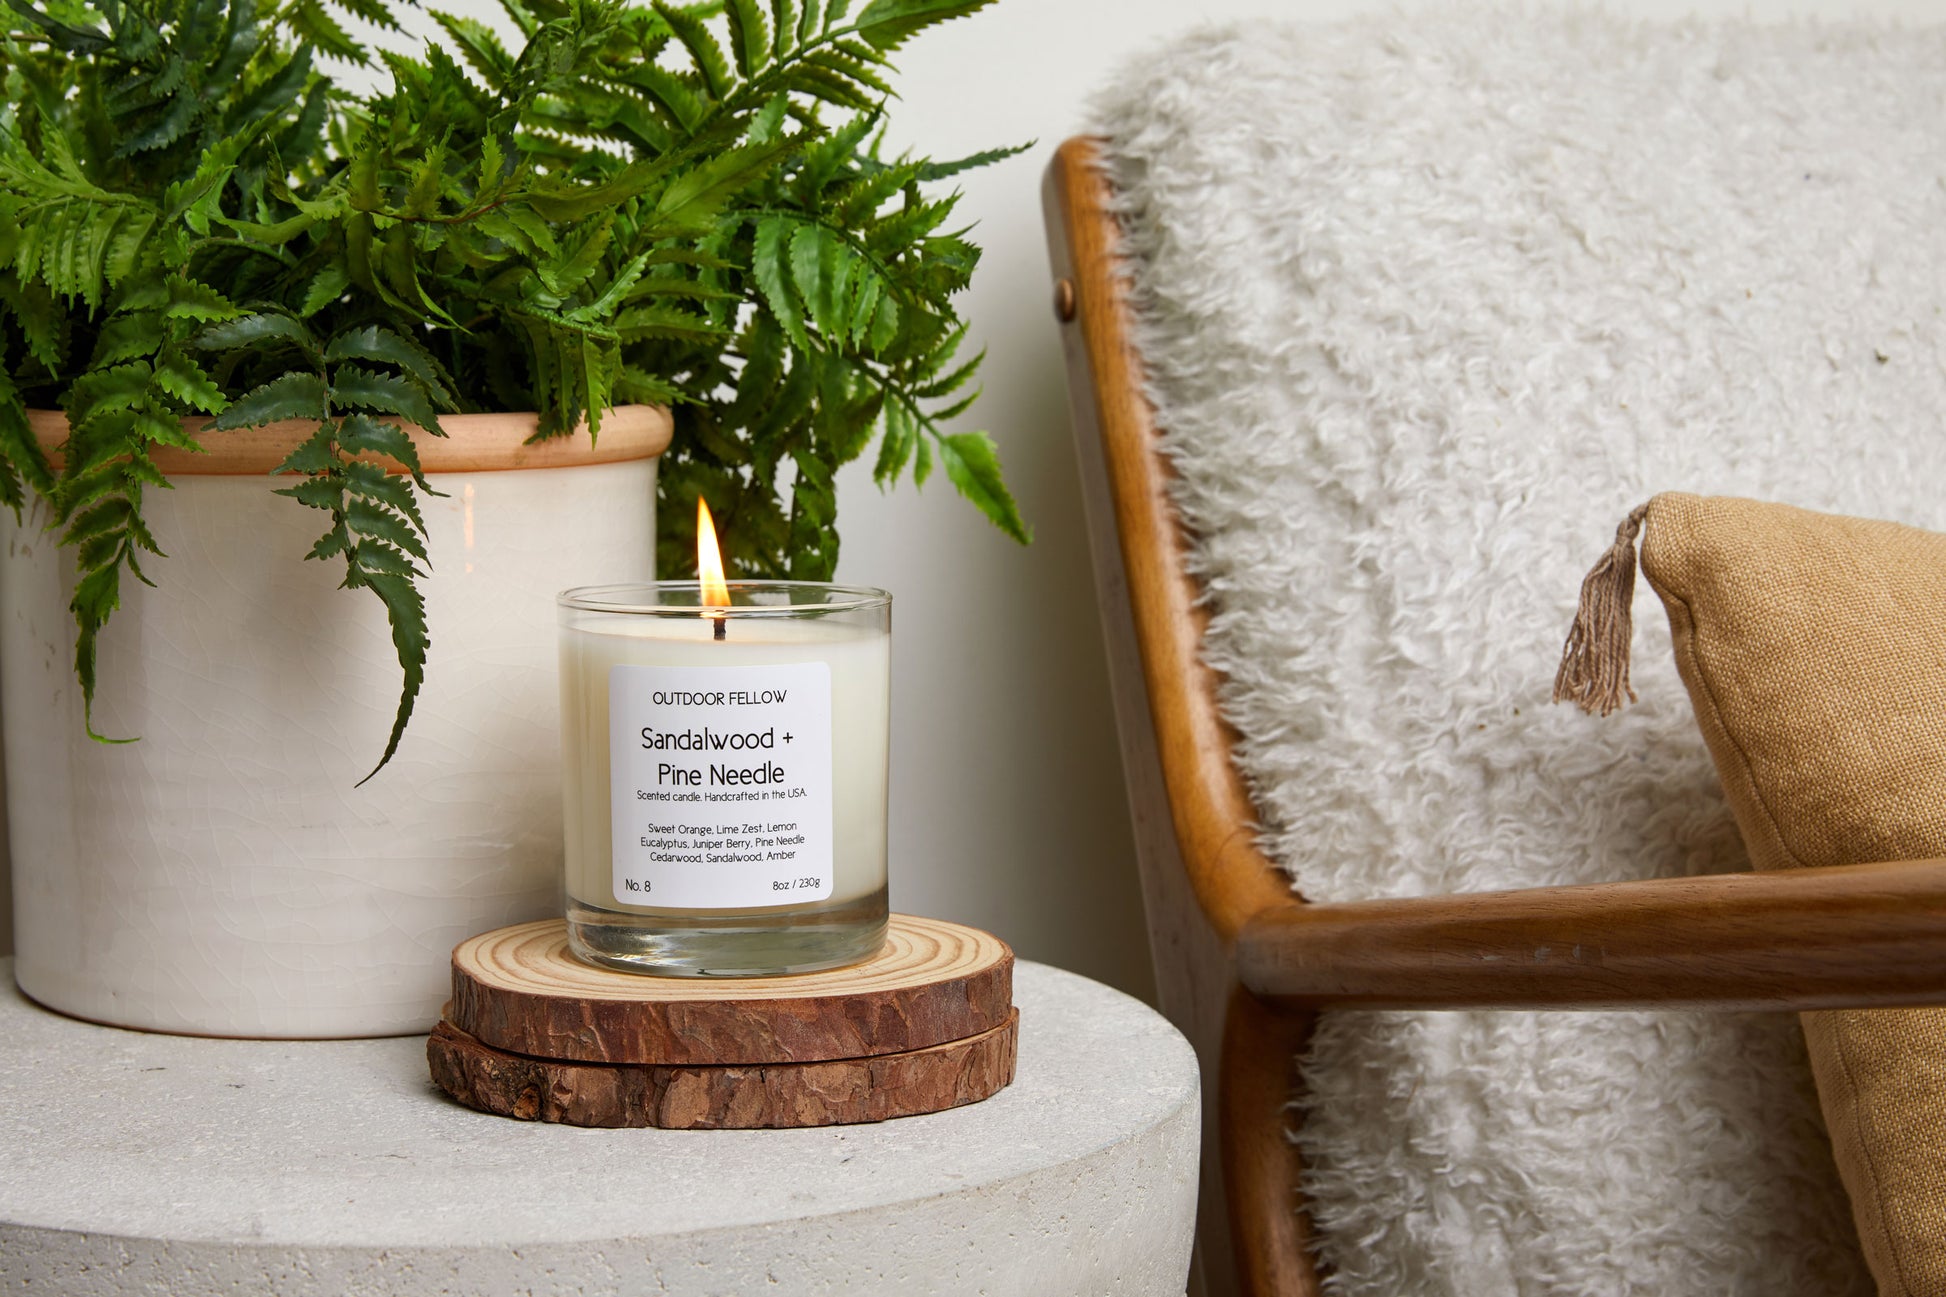 Sandalwood + Pine Needle candle on side table in front of a fern